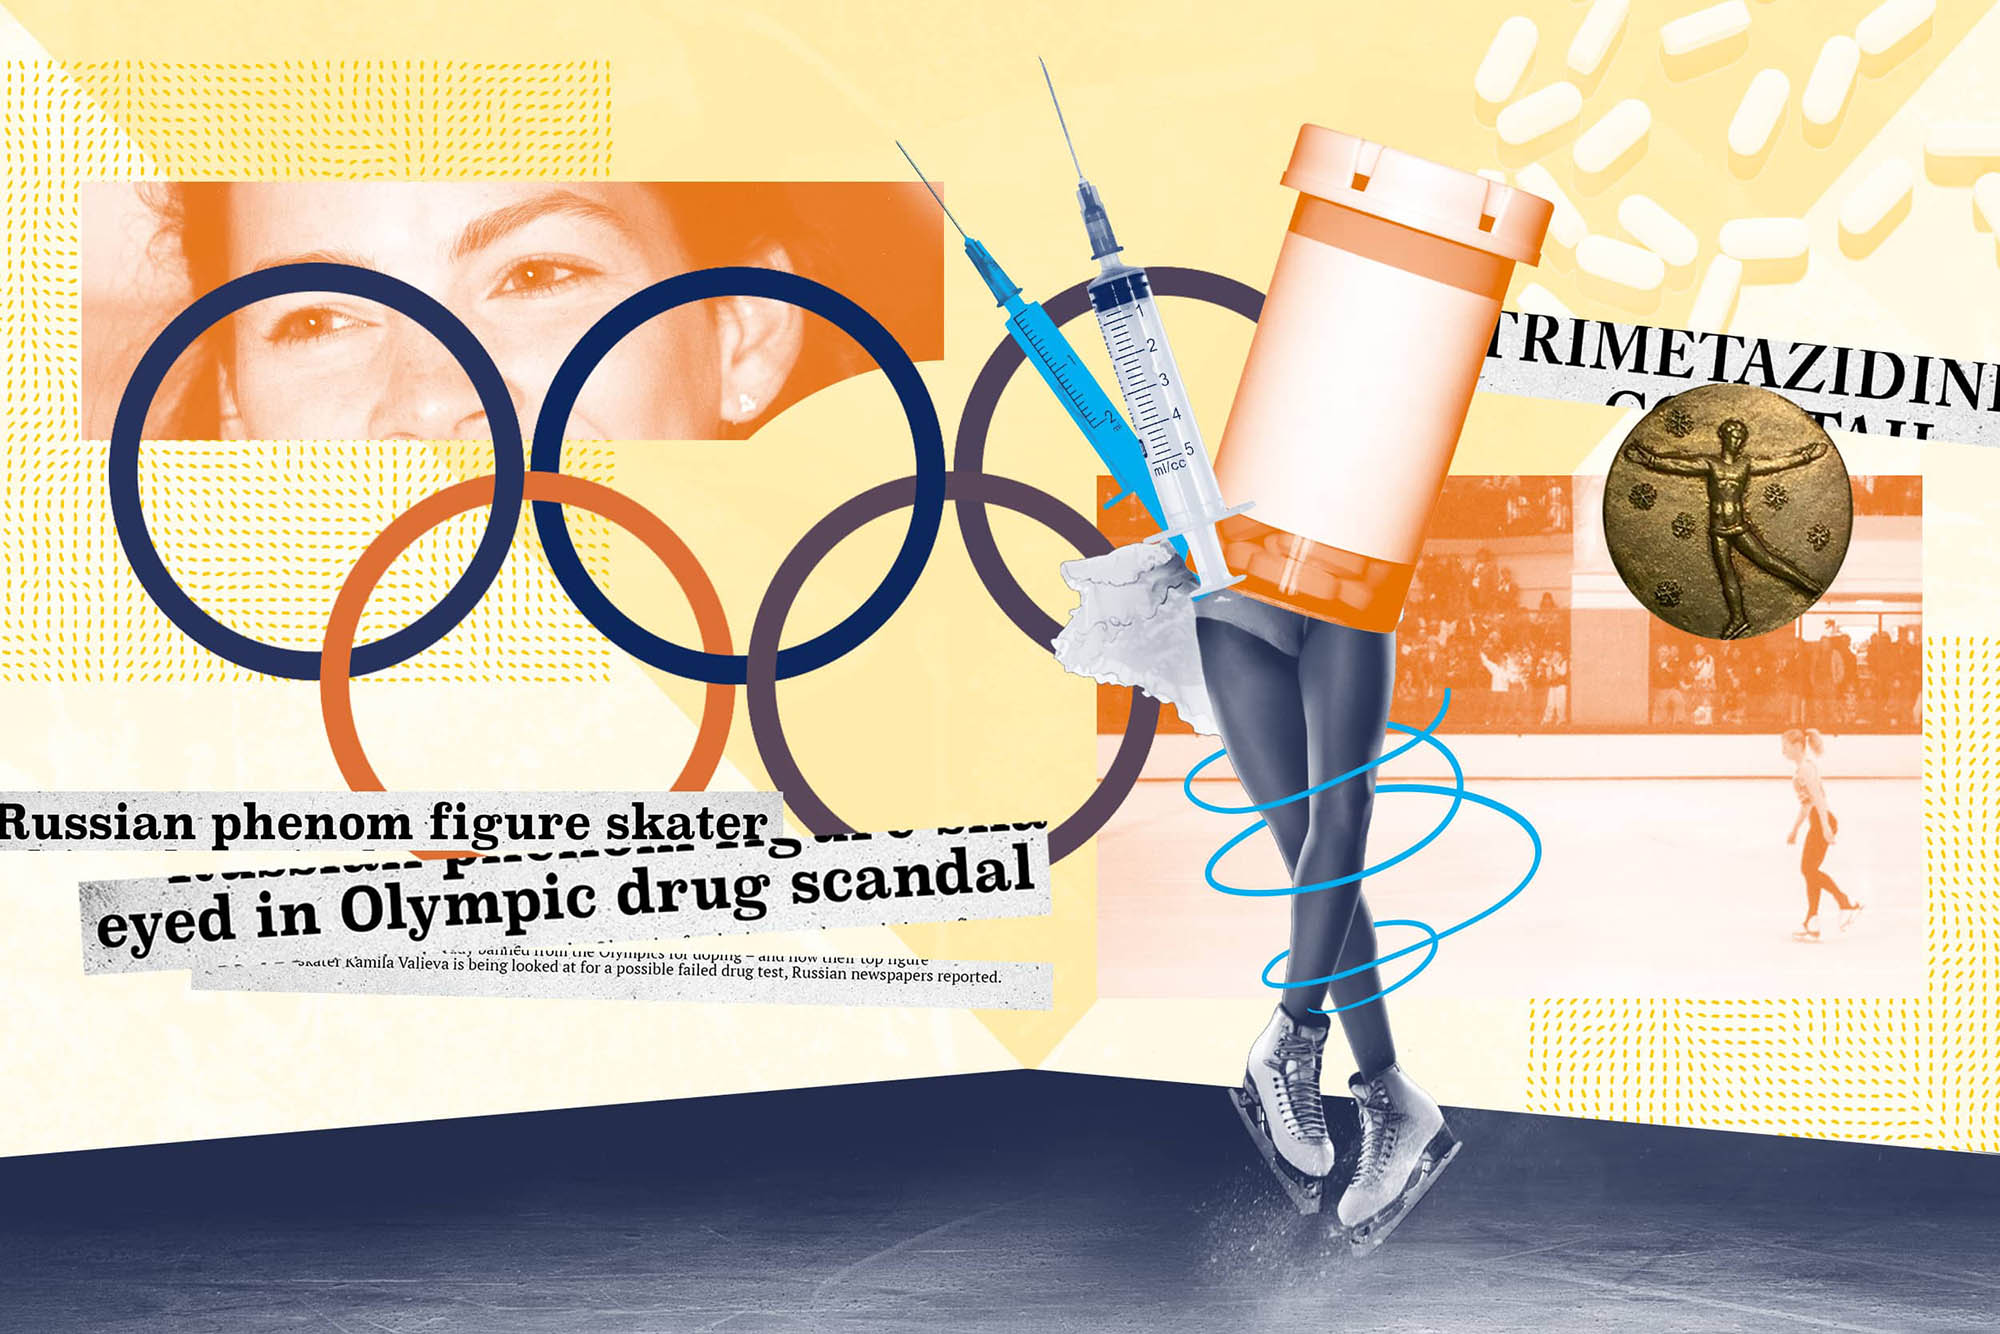 Illustration of Kamila Valieva's eyes, olympic rings, gold medal, skater whose upper body is a pill bottle and syringes and headlines that read Russian phenom figure skater, eyed in Olympic drug scandal